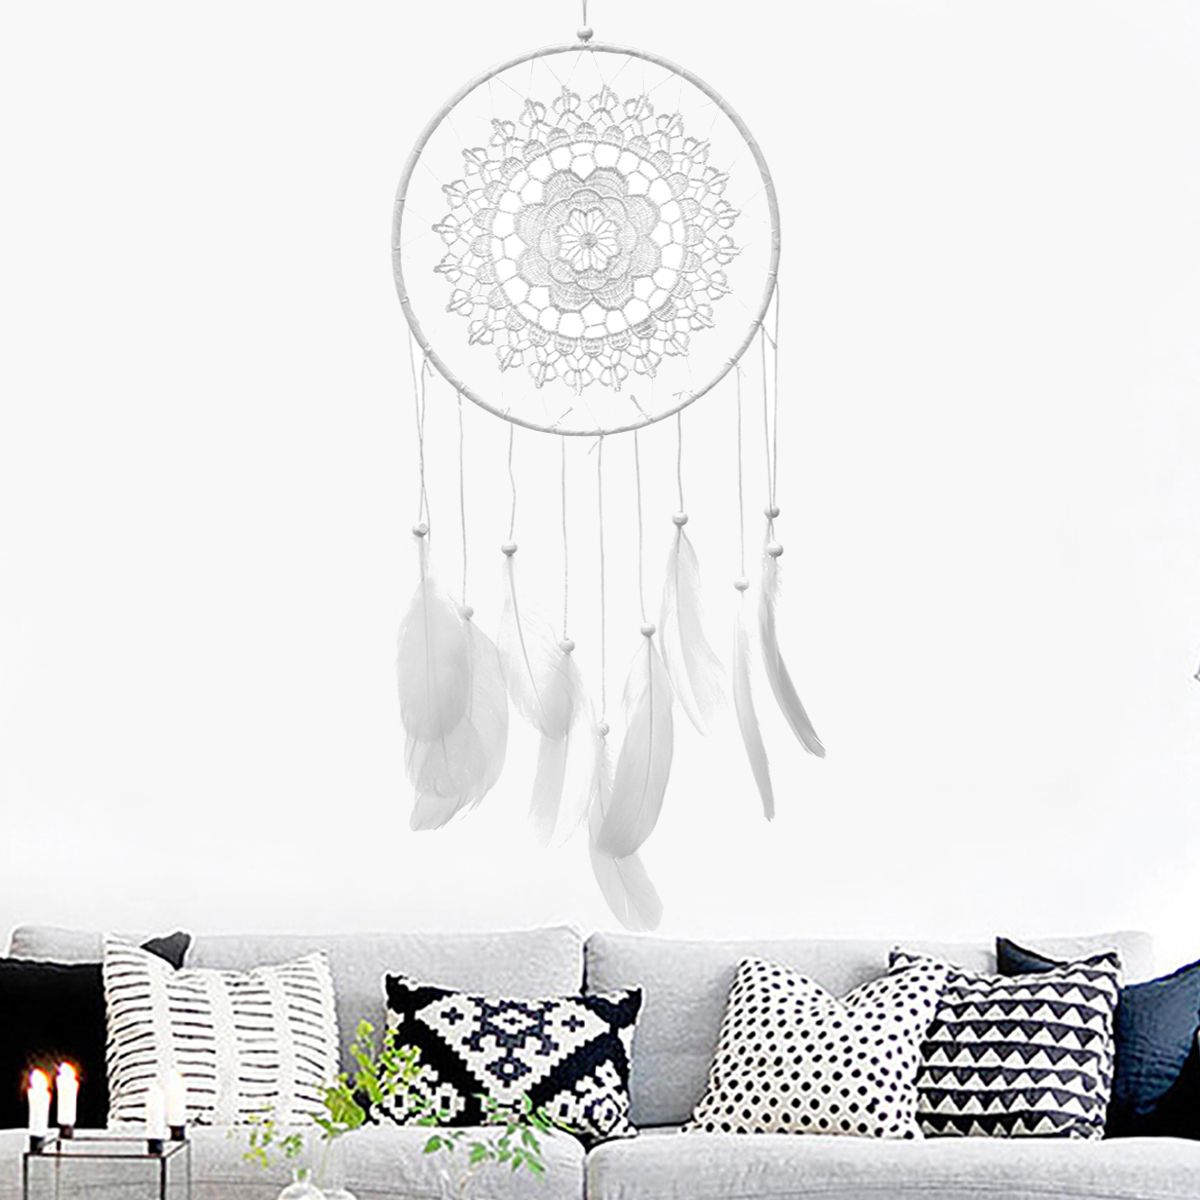 Handmade-Black-Feather-Lace-Dream-Catcher-Bead-Hanging-Decor-Home-Car-Wall-Decorations-1557101